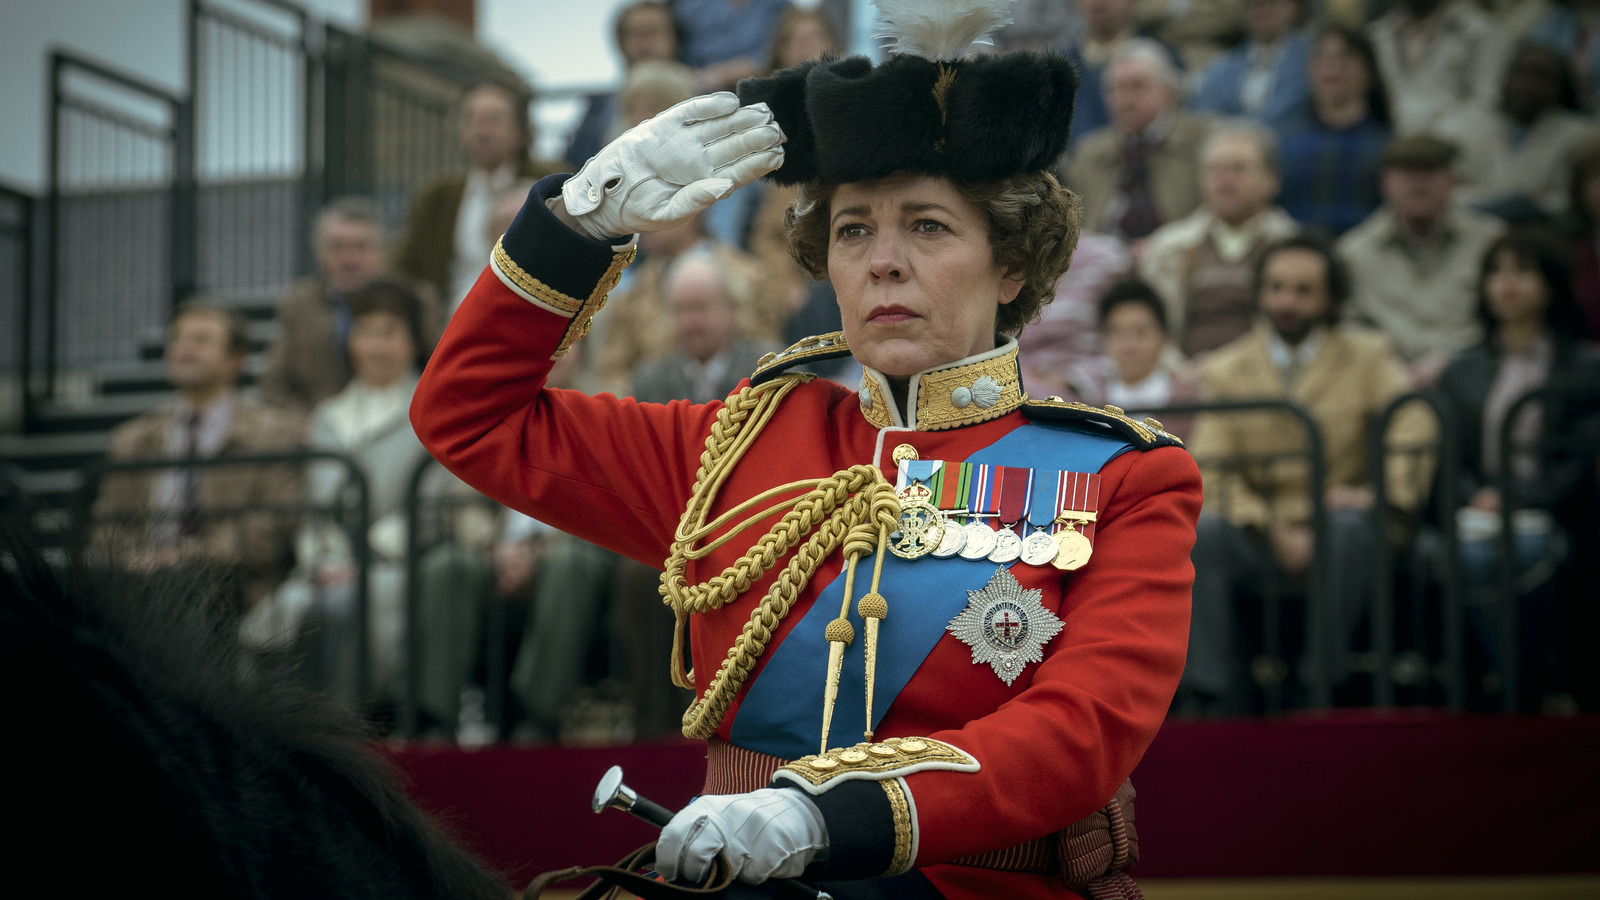 The Crown Season 4 Moments Fans Didn't Get To See